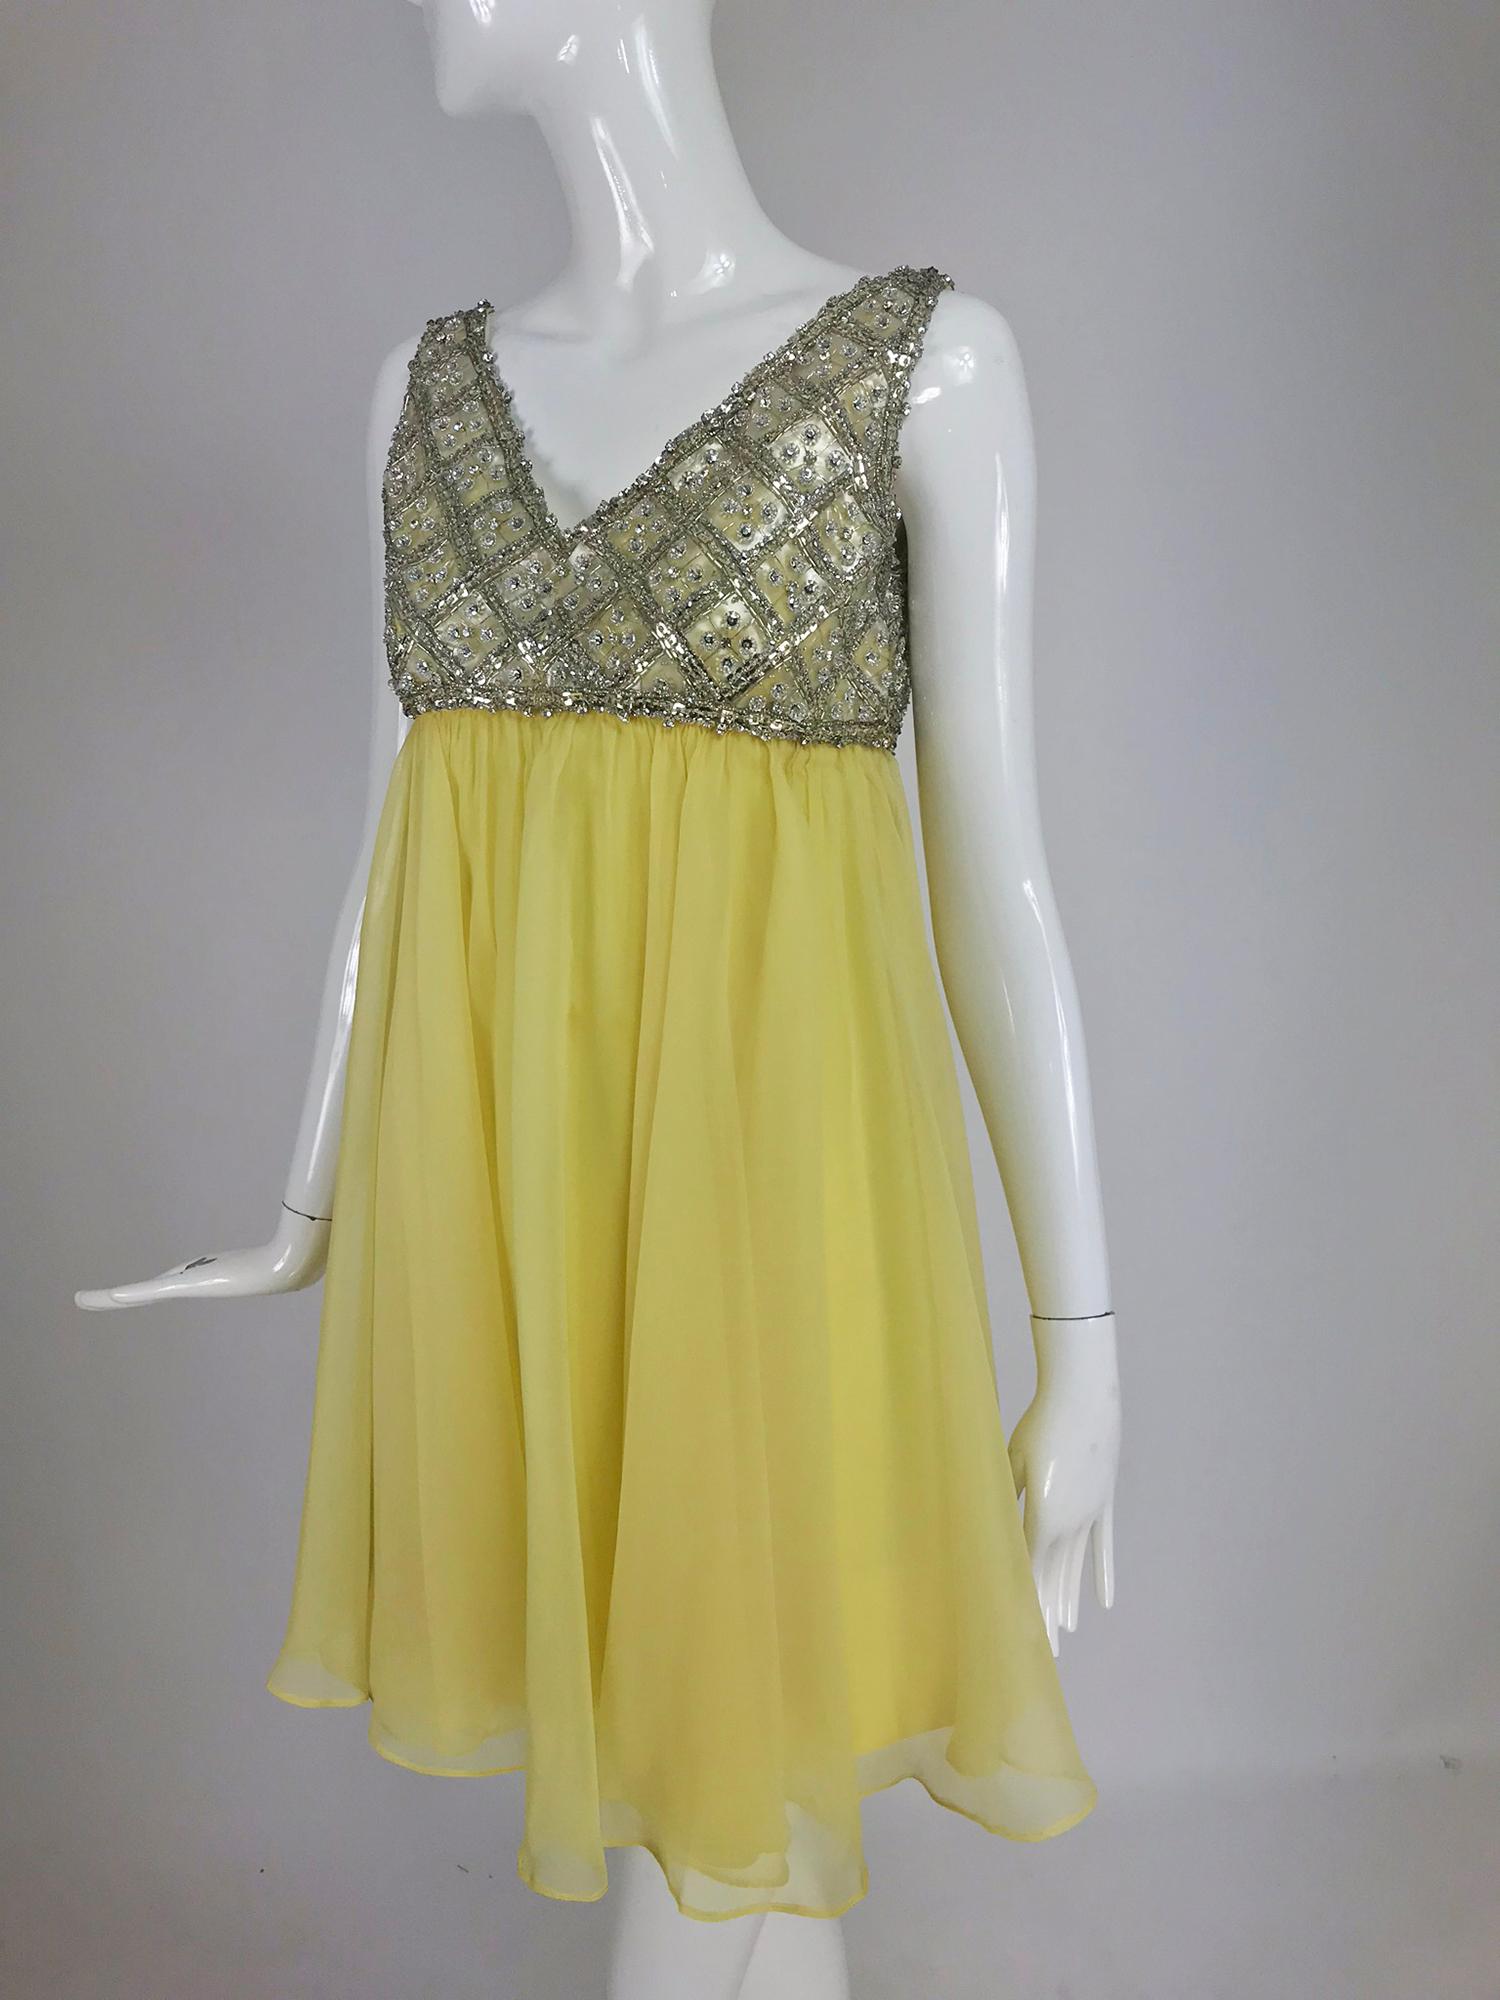 Malcolm Starr baby doll dress in rhinestones and lemon silk chiffon from the 1960s. A dress worthy of Goldie Hawn in her Laugh In days. The bodice is pretty spectacular with a plunge neckline at the front and a bateau neckline at the back. The